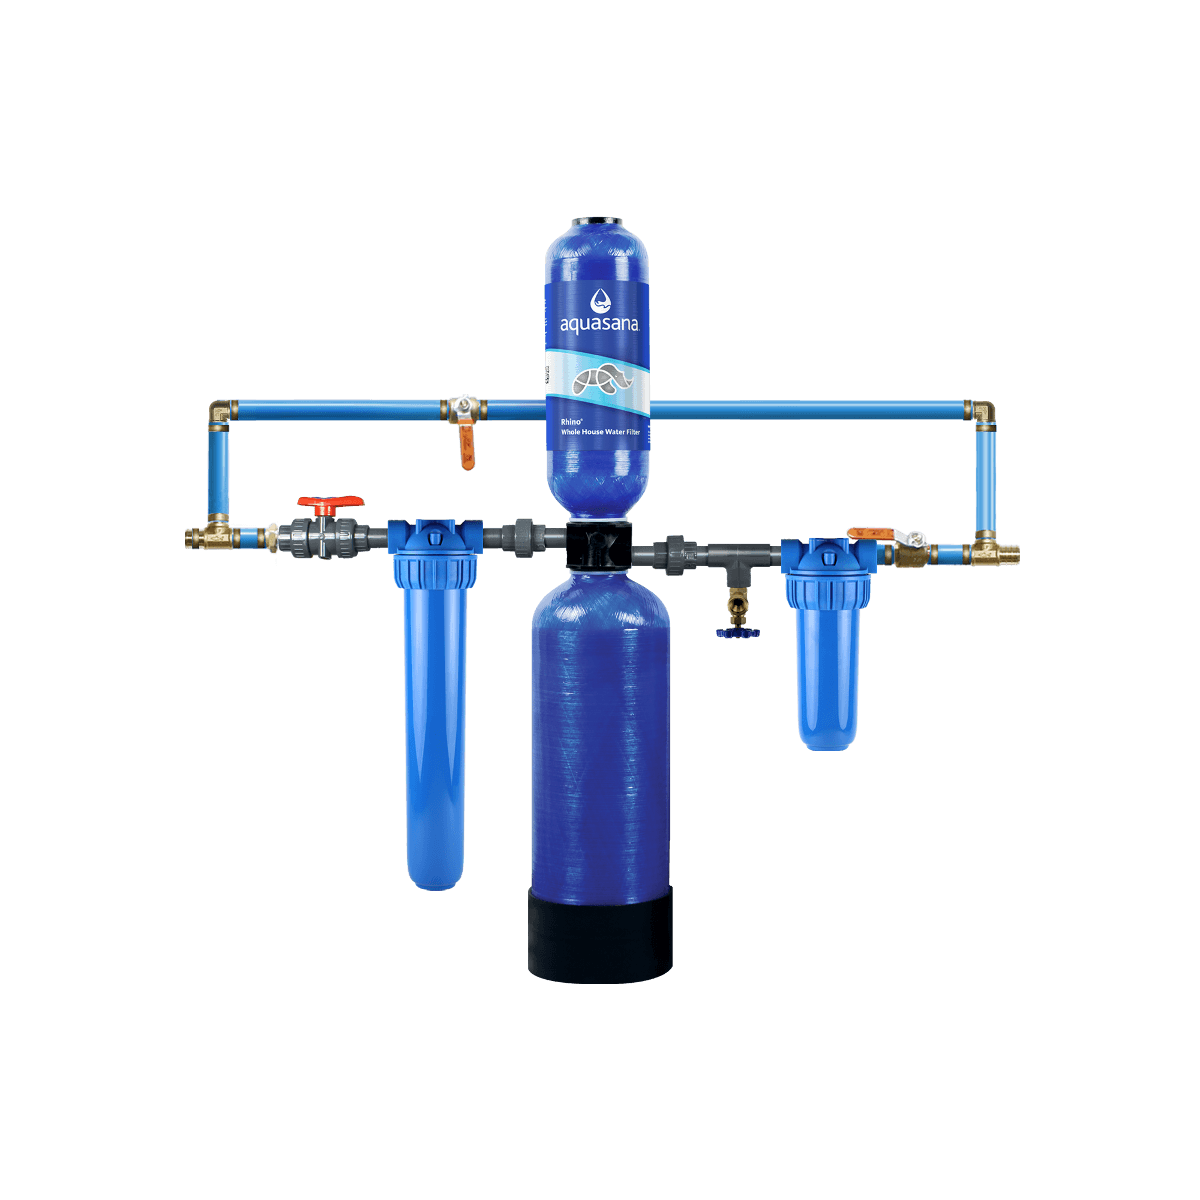 Rhino Whole House Water Filter System Home Water Filtration 10/1,000,000 Aquasana